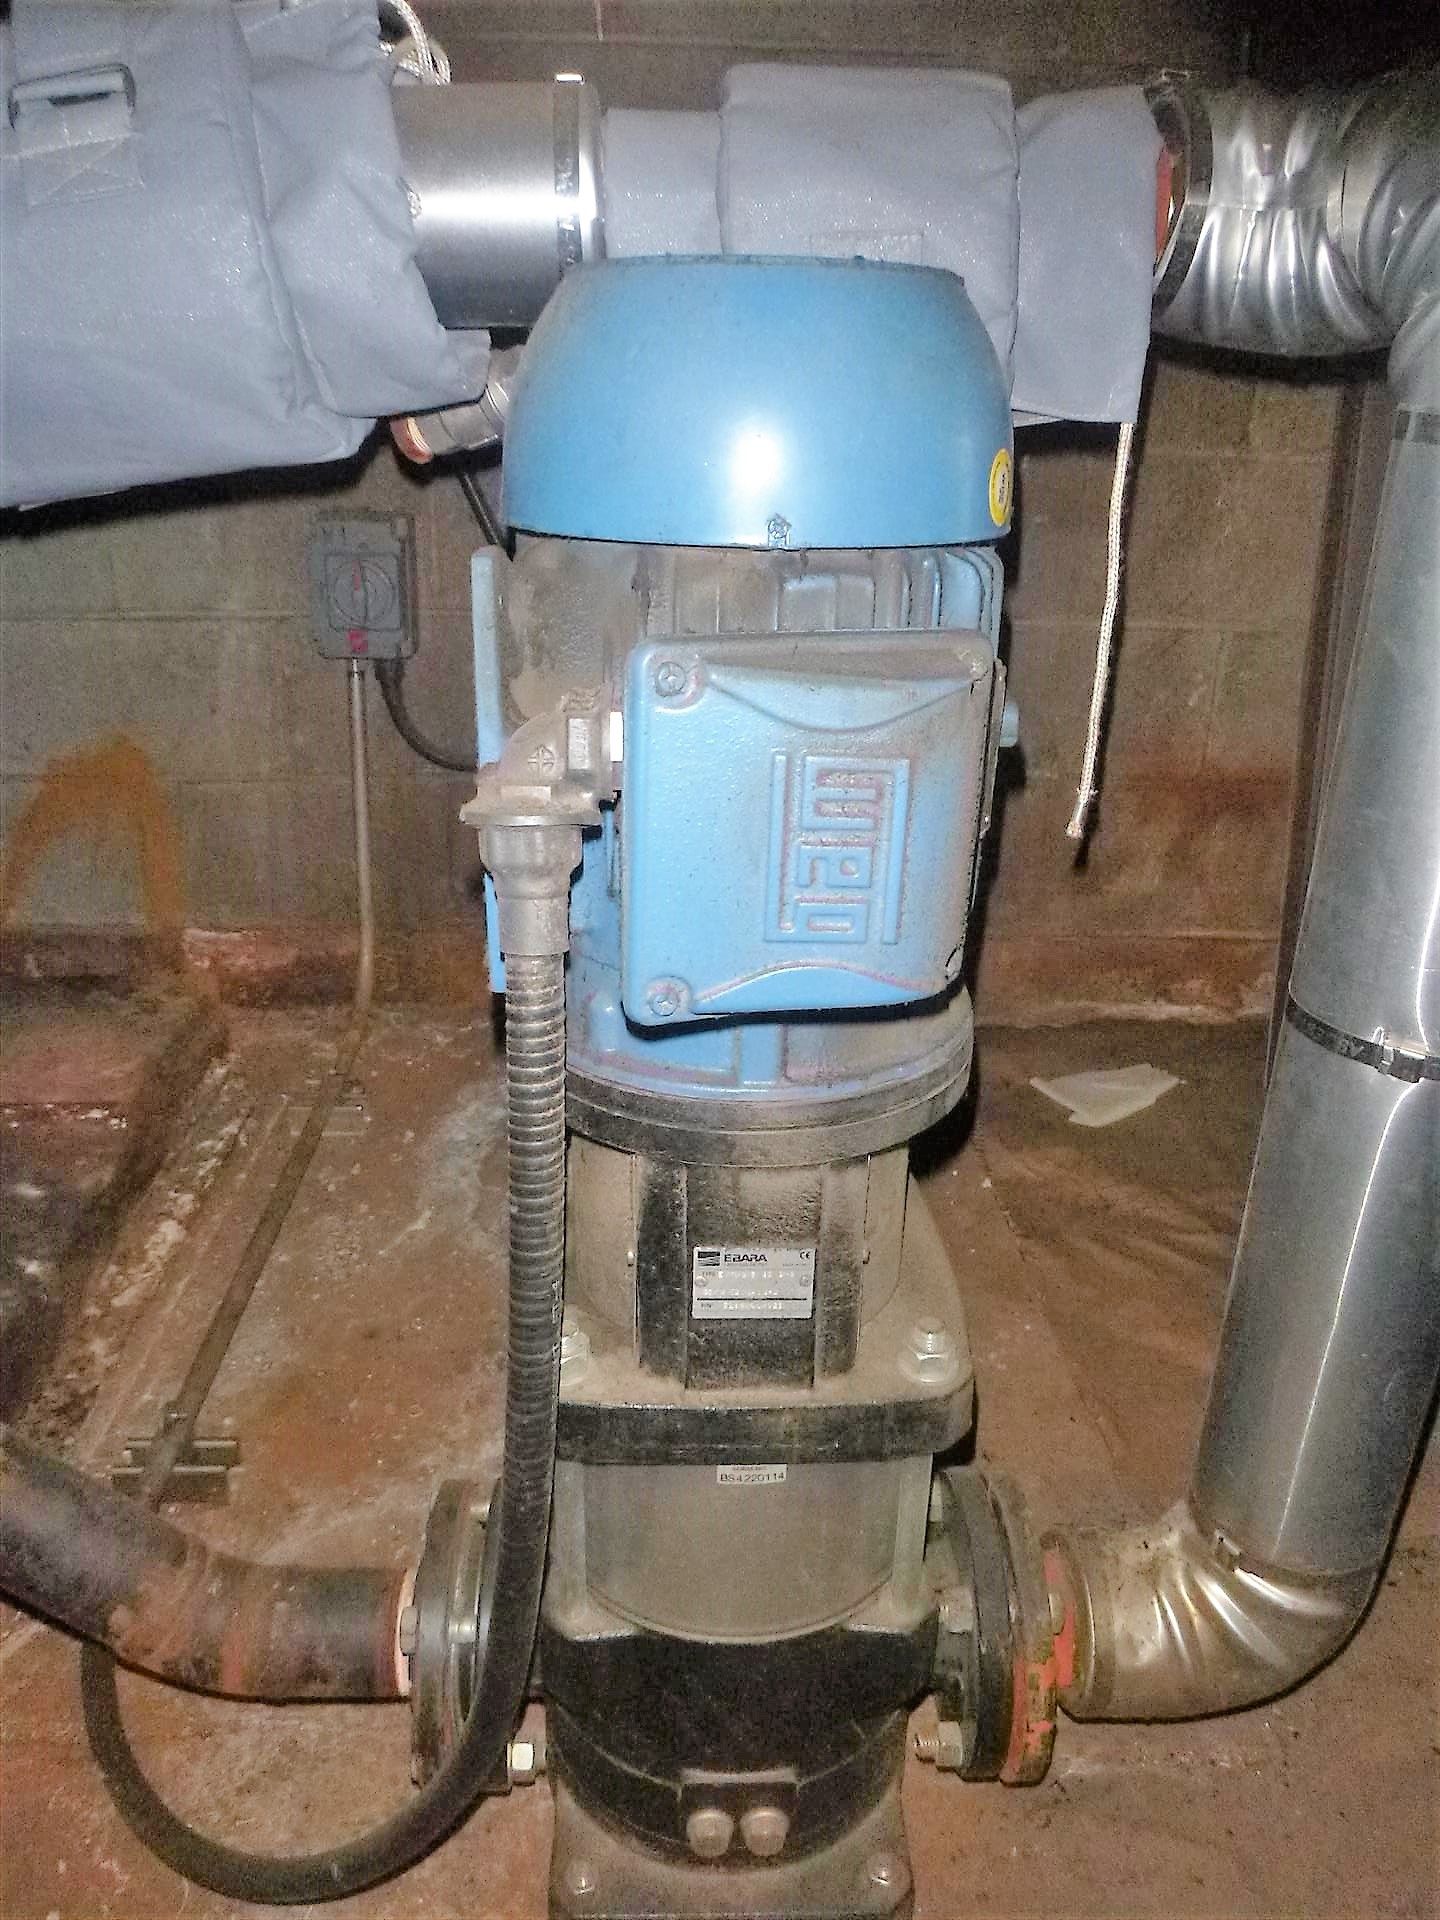 condensate tank c/w Ebara pump and valves [1st Floor, Shops] - Image 2 of 2